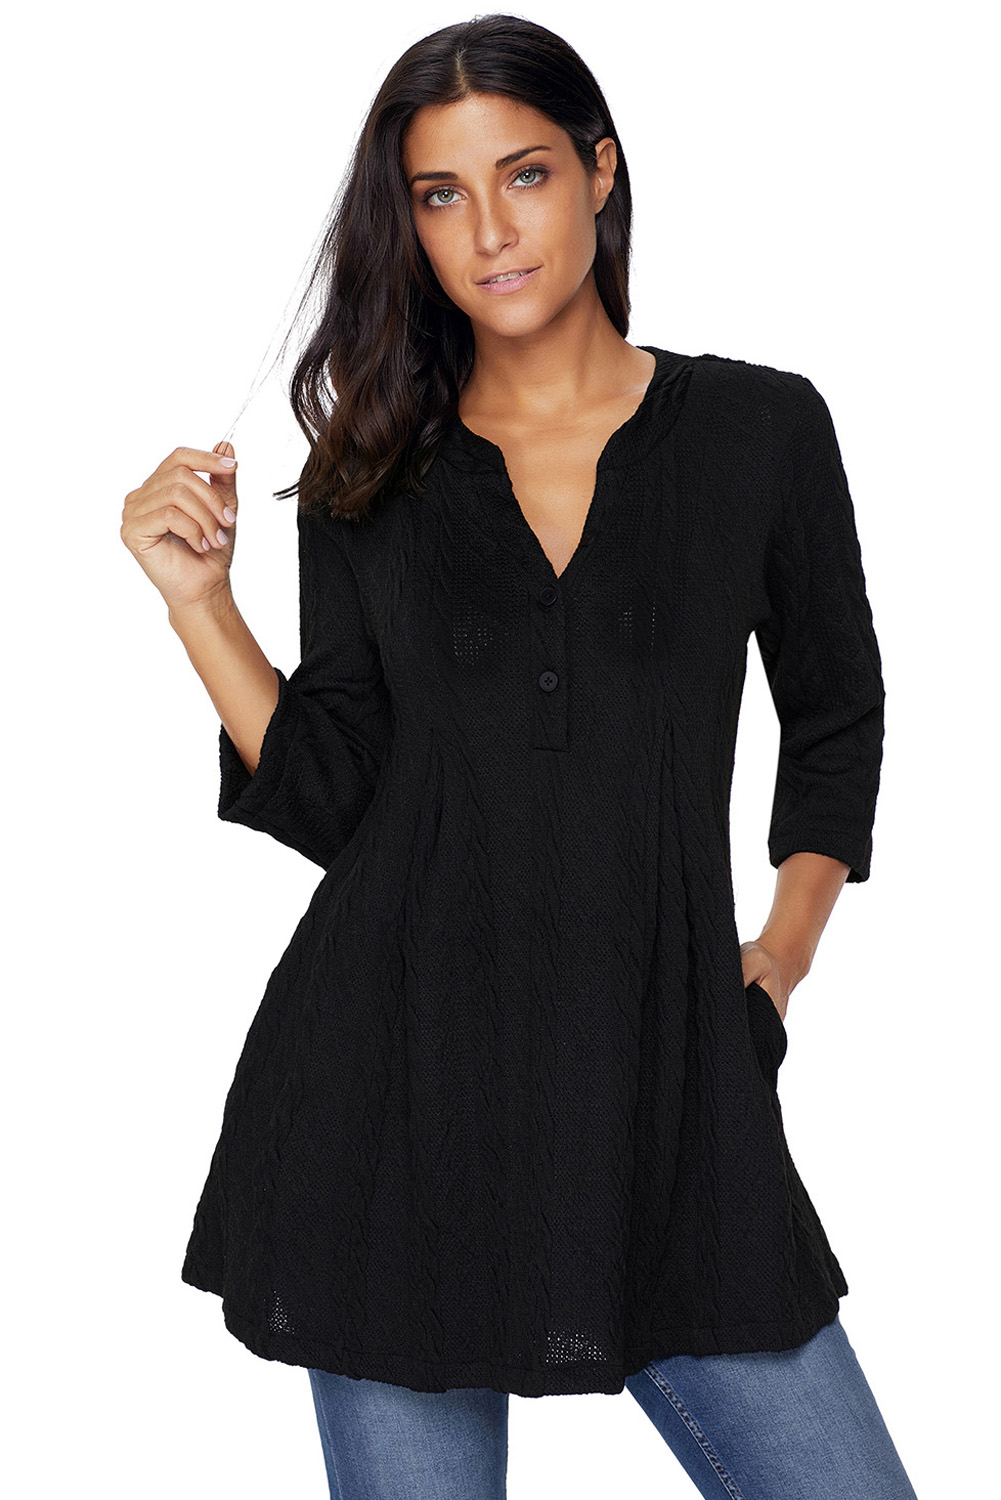 BY27750-2 Black Cable Knit Button Neck Swingy Tunic